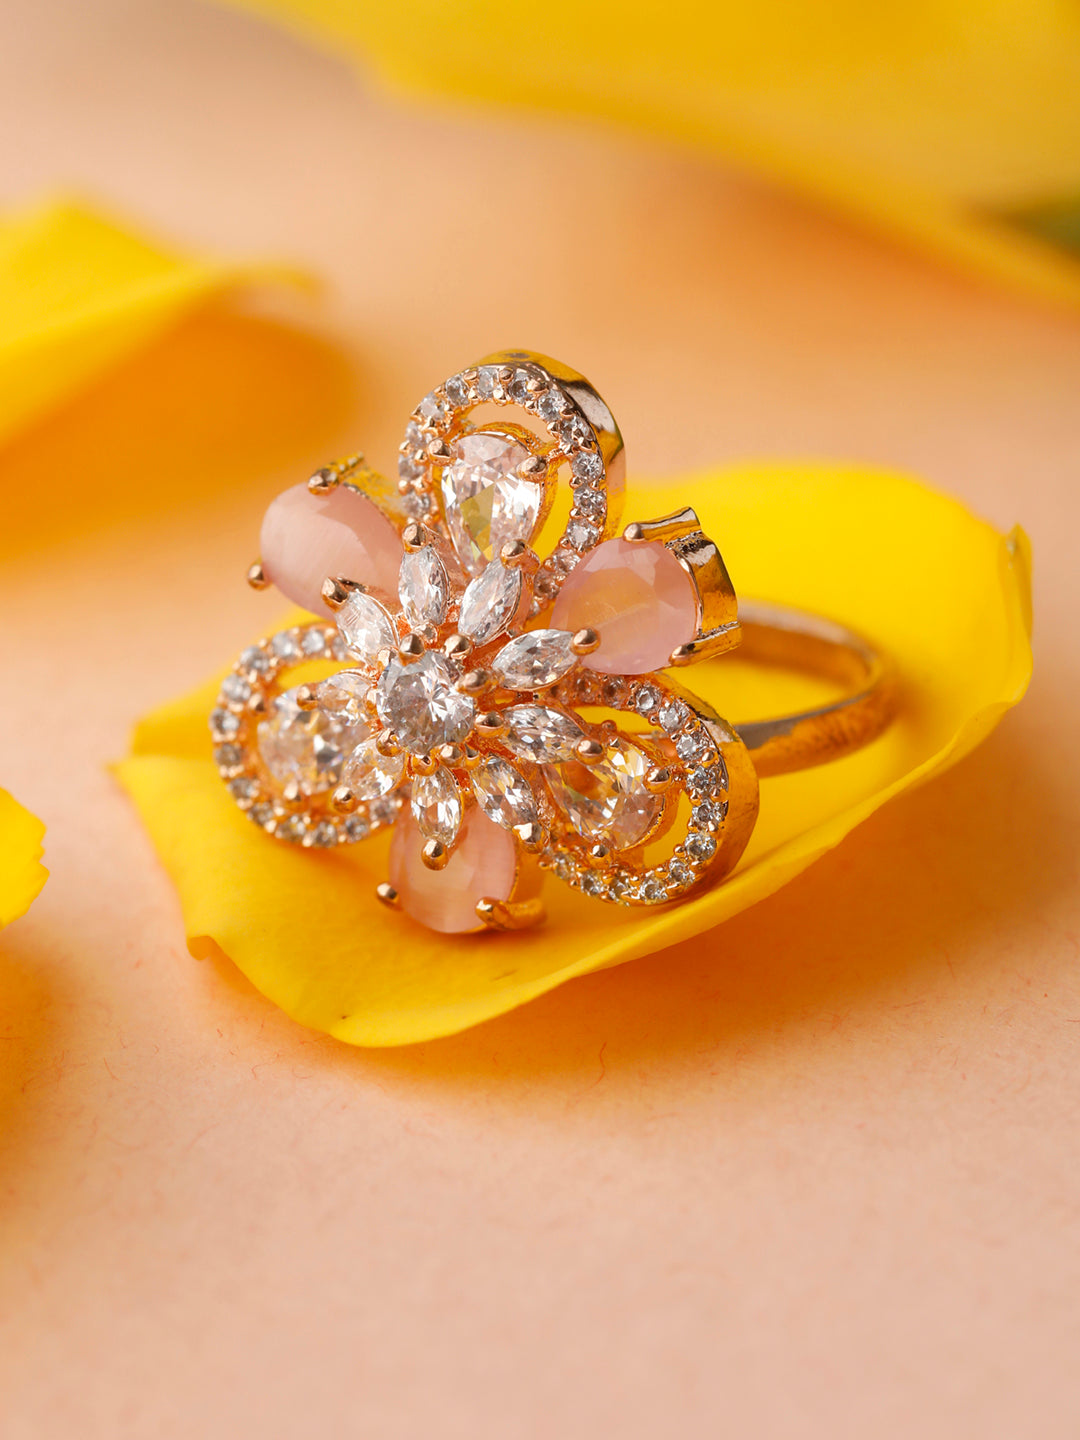 Floral Design Rings - South India Jewels | Floral design ring, Ring designs,  Blooming ring